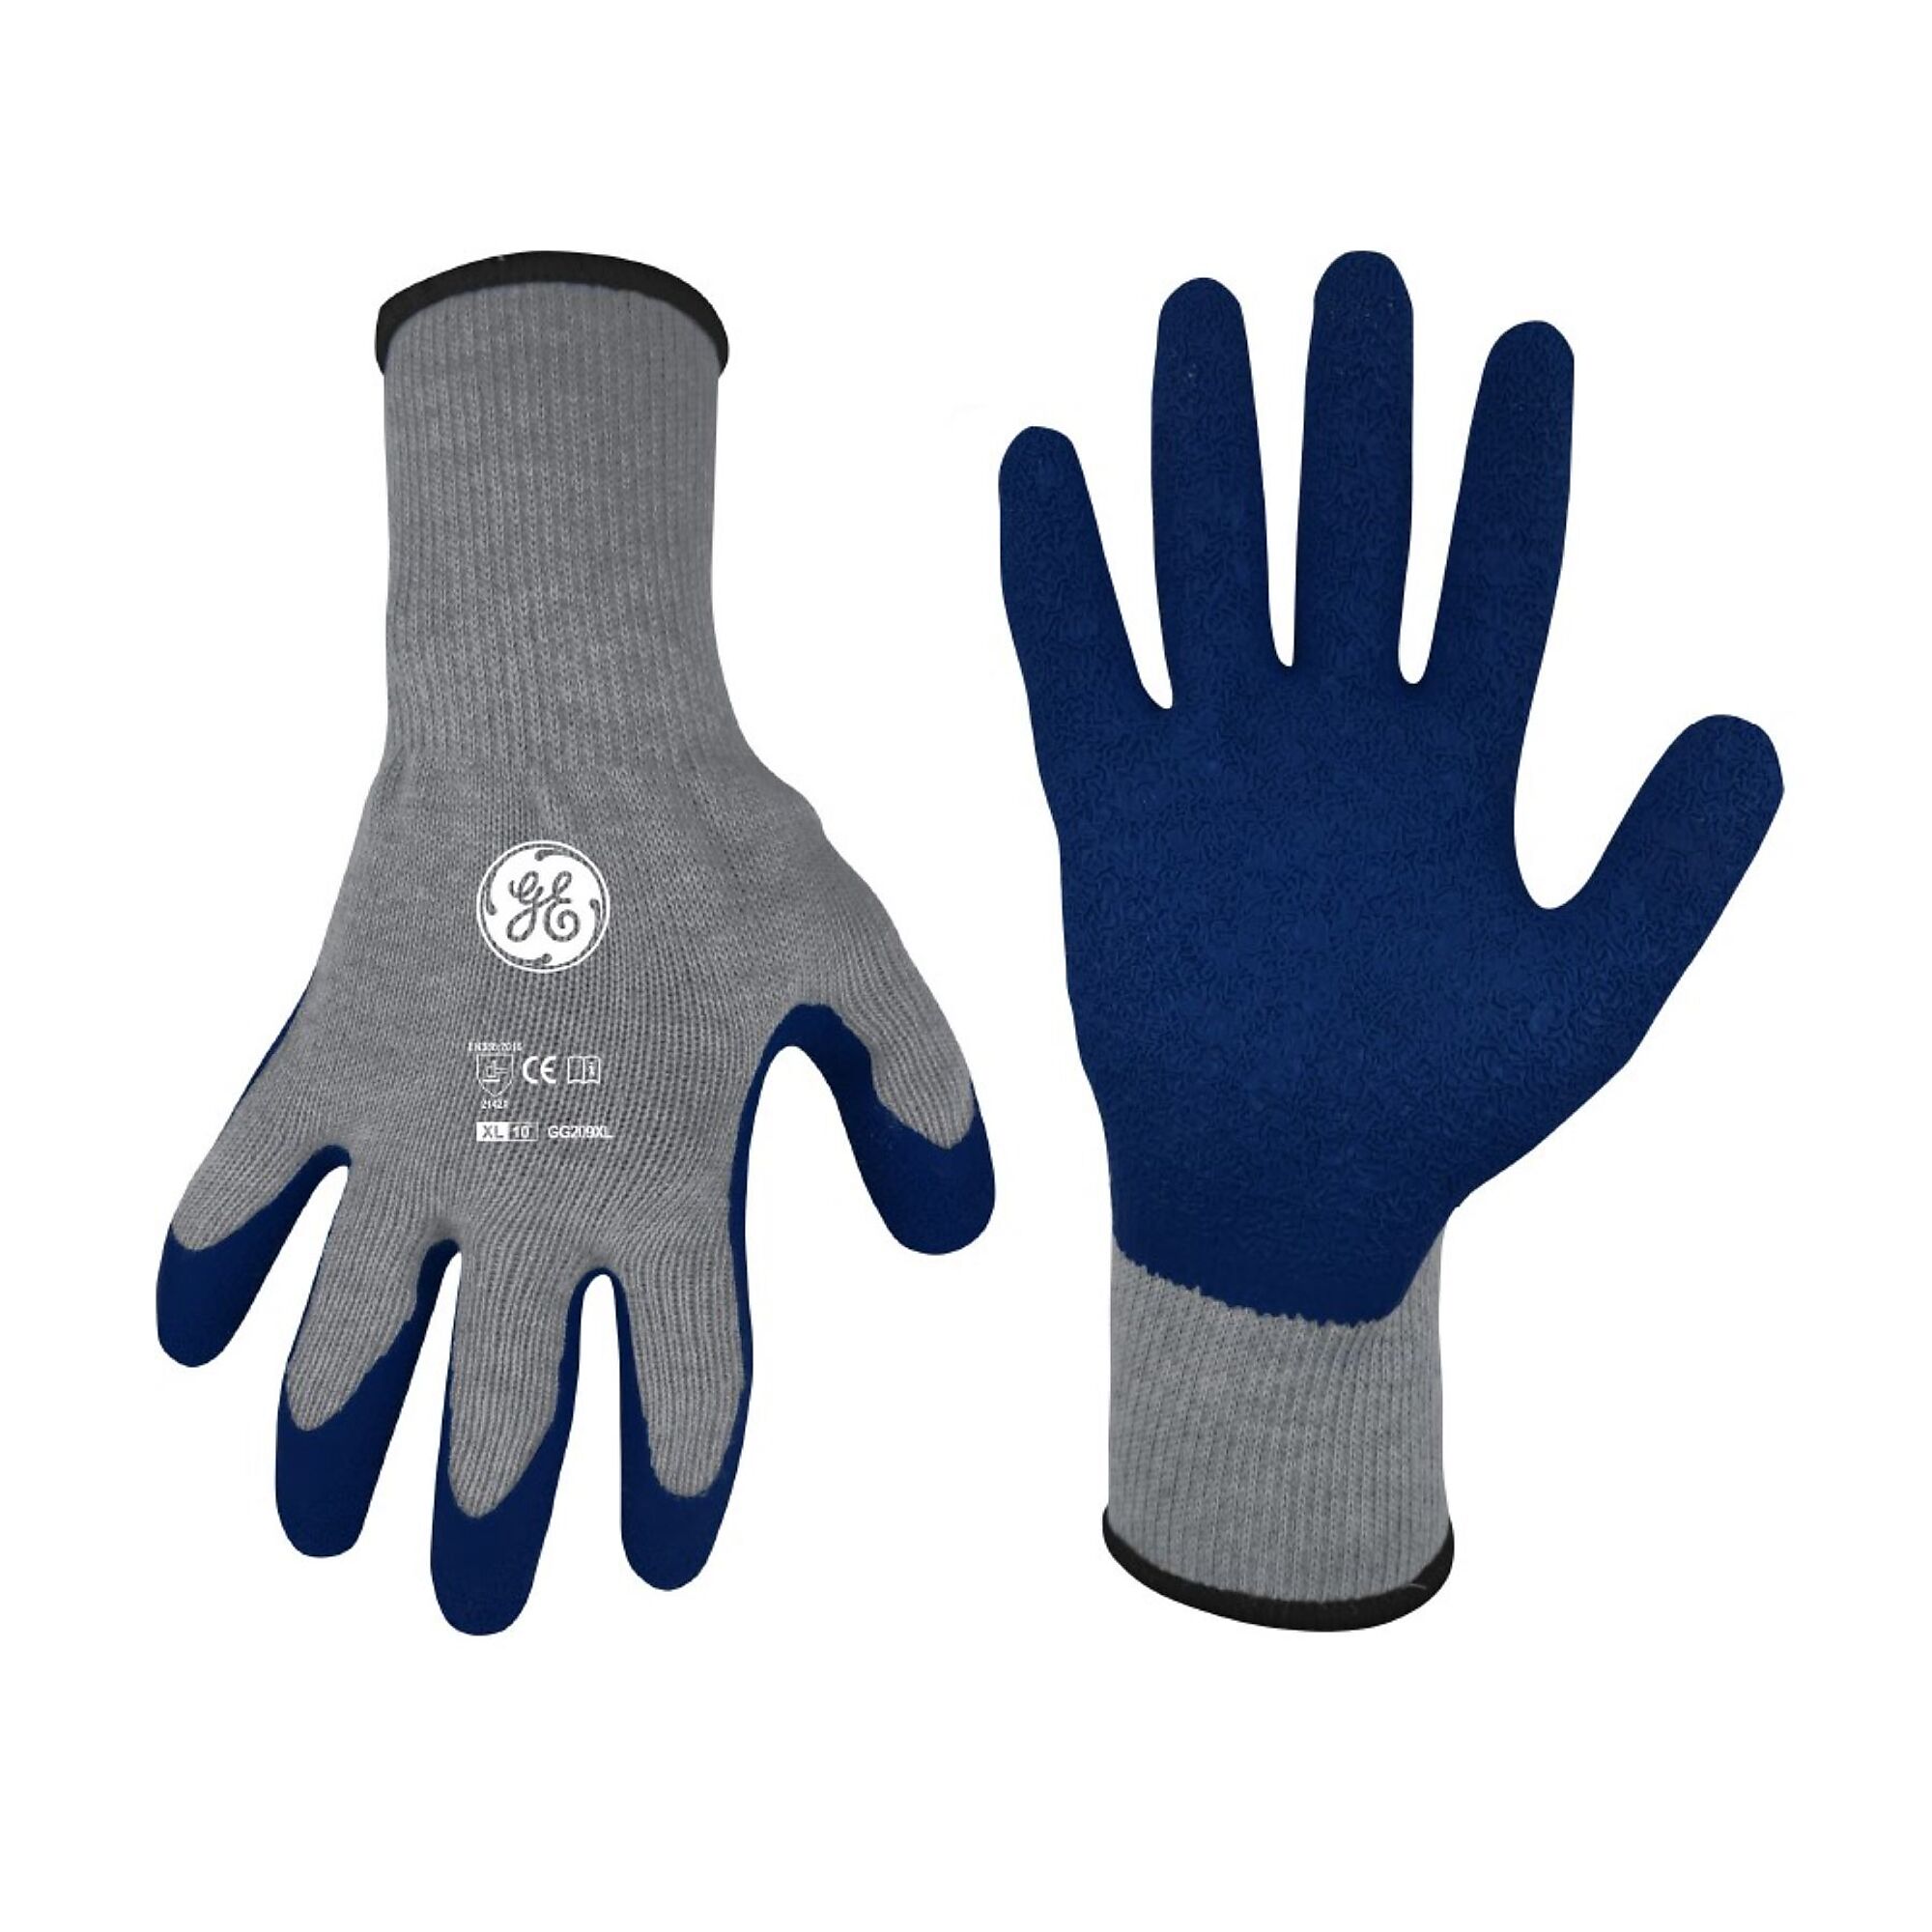 General Electric, Unisex Crinkle Dipped Gloves Blue/Gray XL 12 pair, Size XL, Included (qty.) 12, Model GG209XL